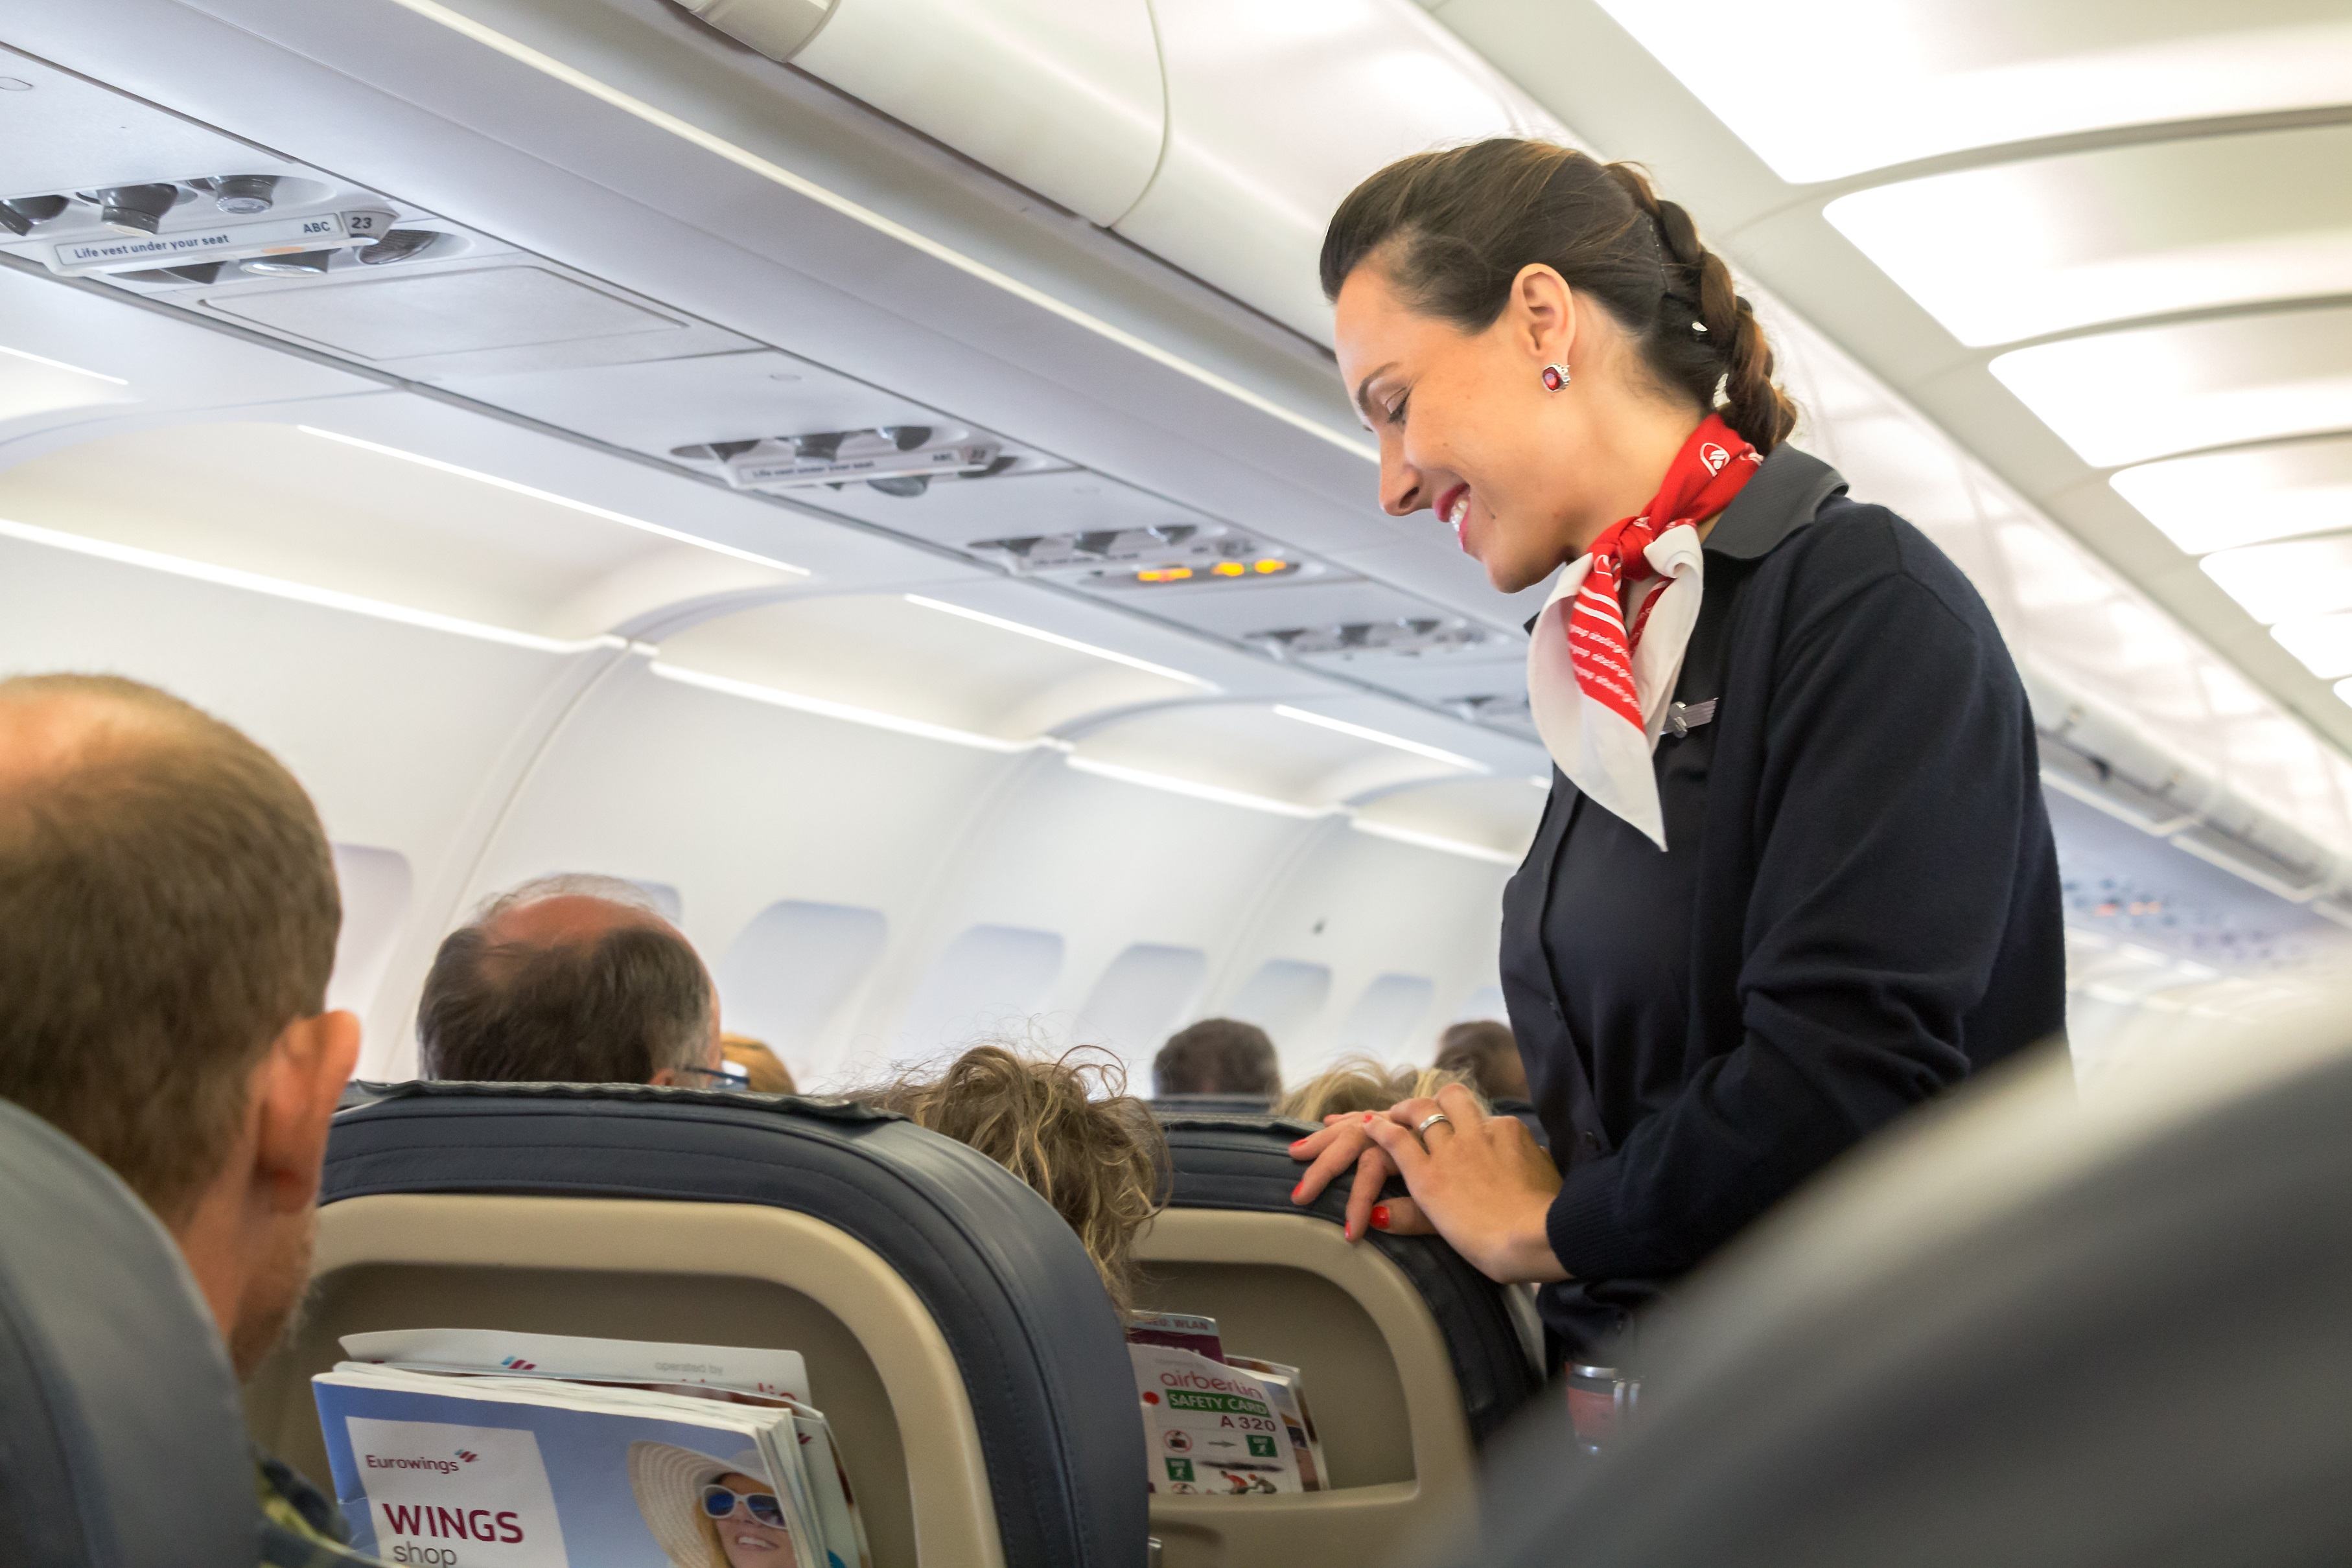 Flight Attendants Reveal What You Should Always Wear If You Want an Upgrade to First Class